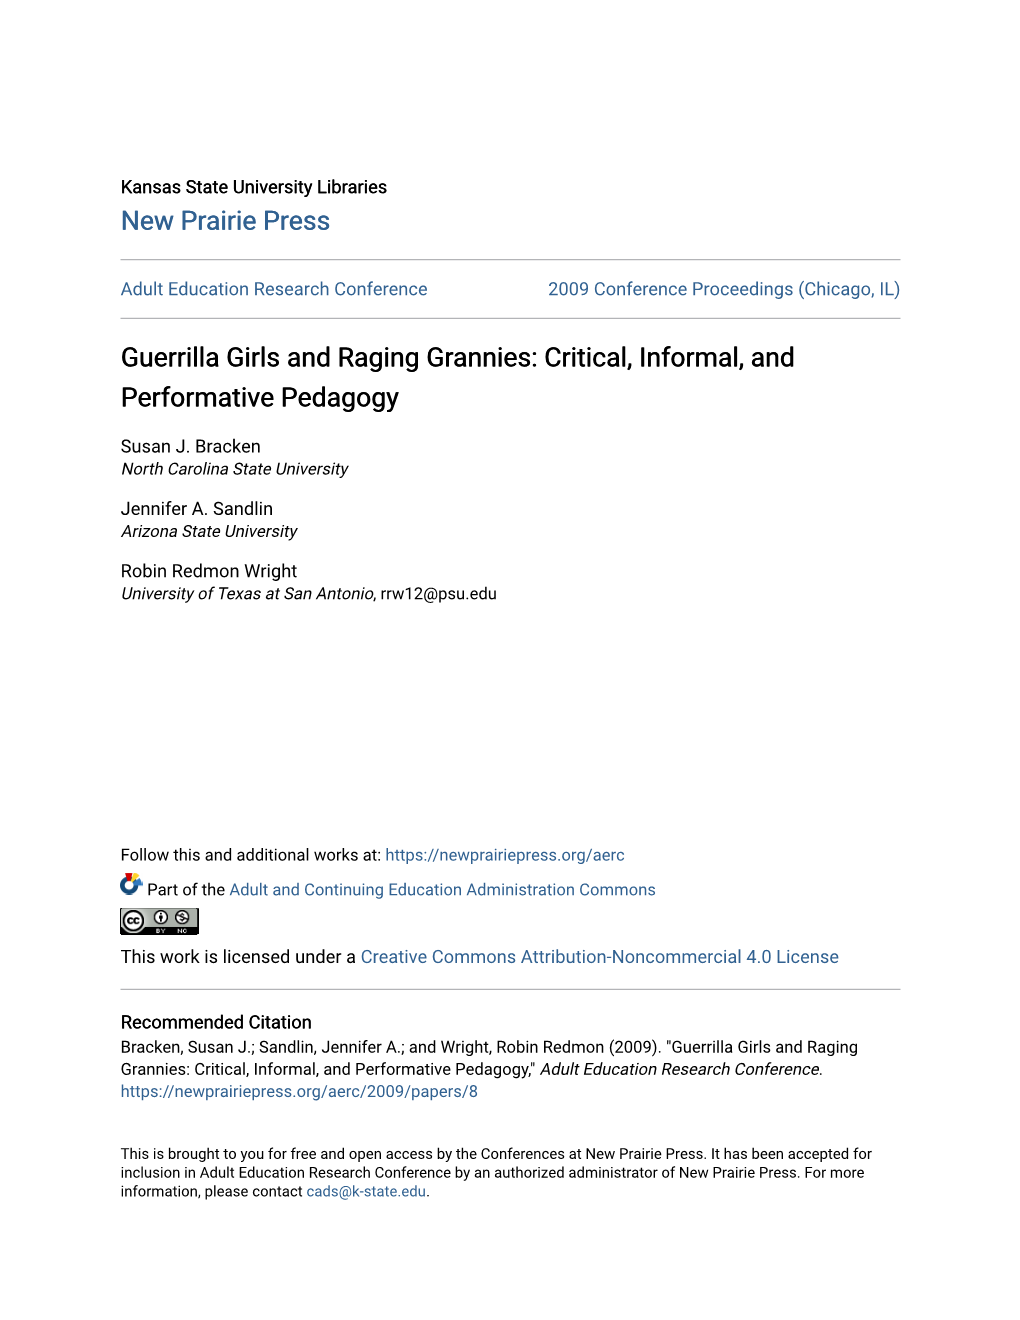 Guerrilla Girls and Raging Grannies: Critical, Informal, and Performative Pedagogy